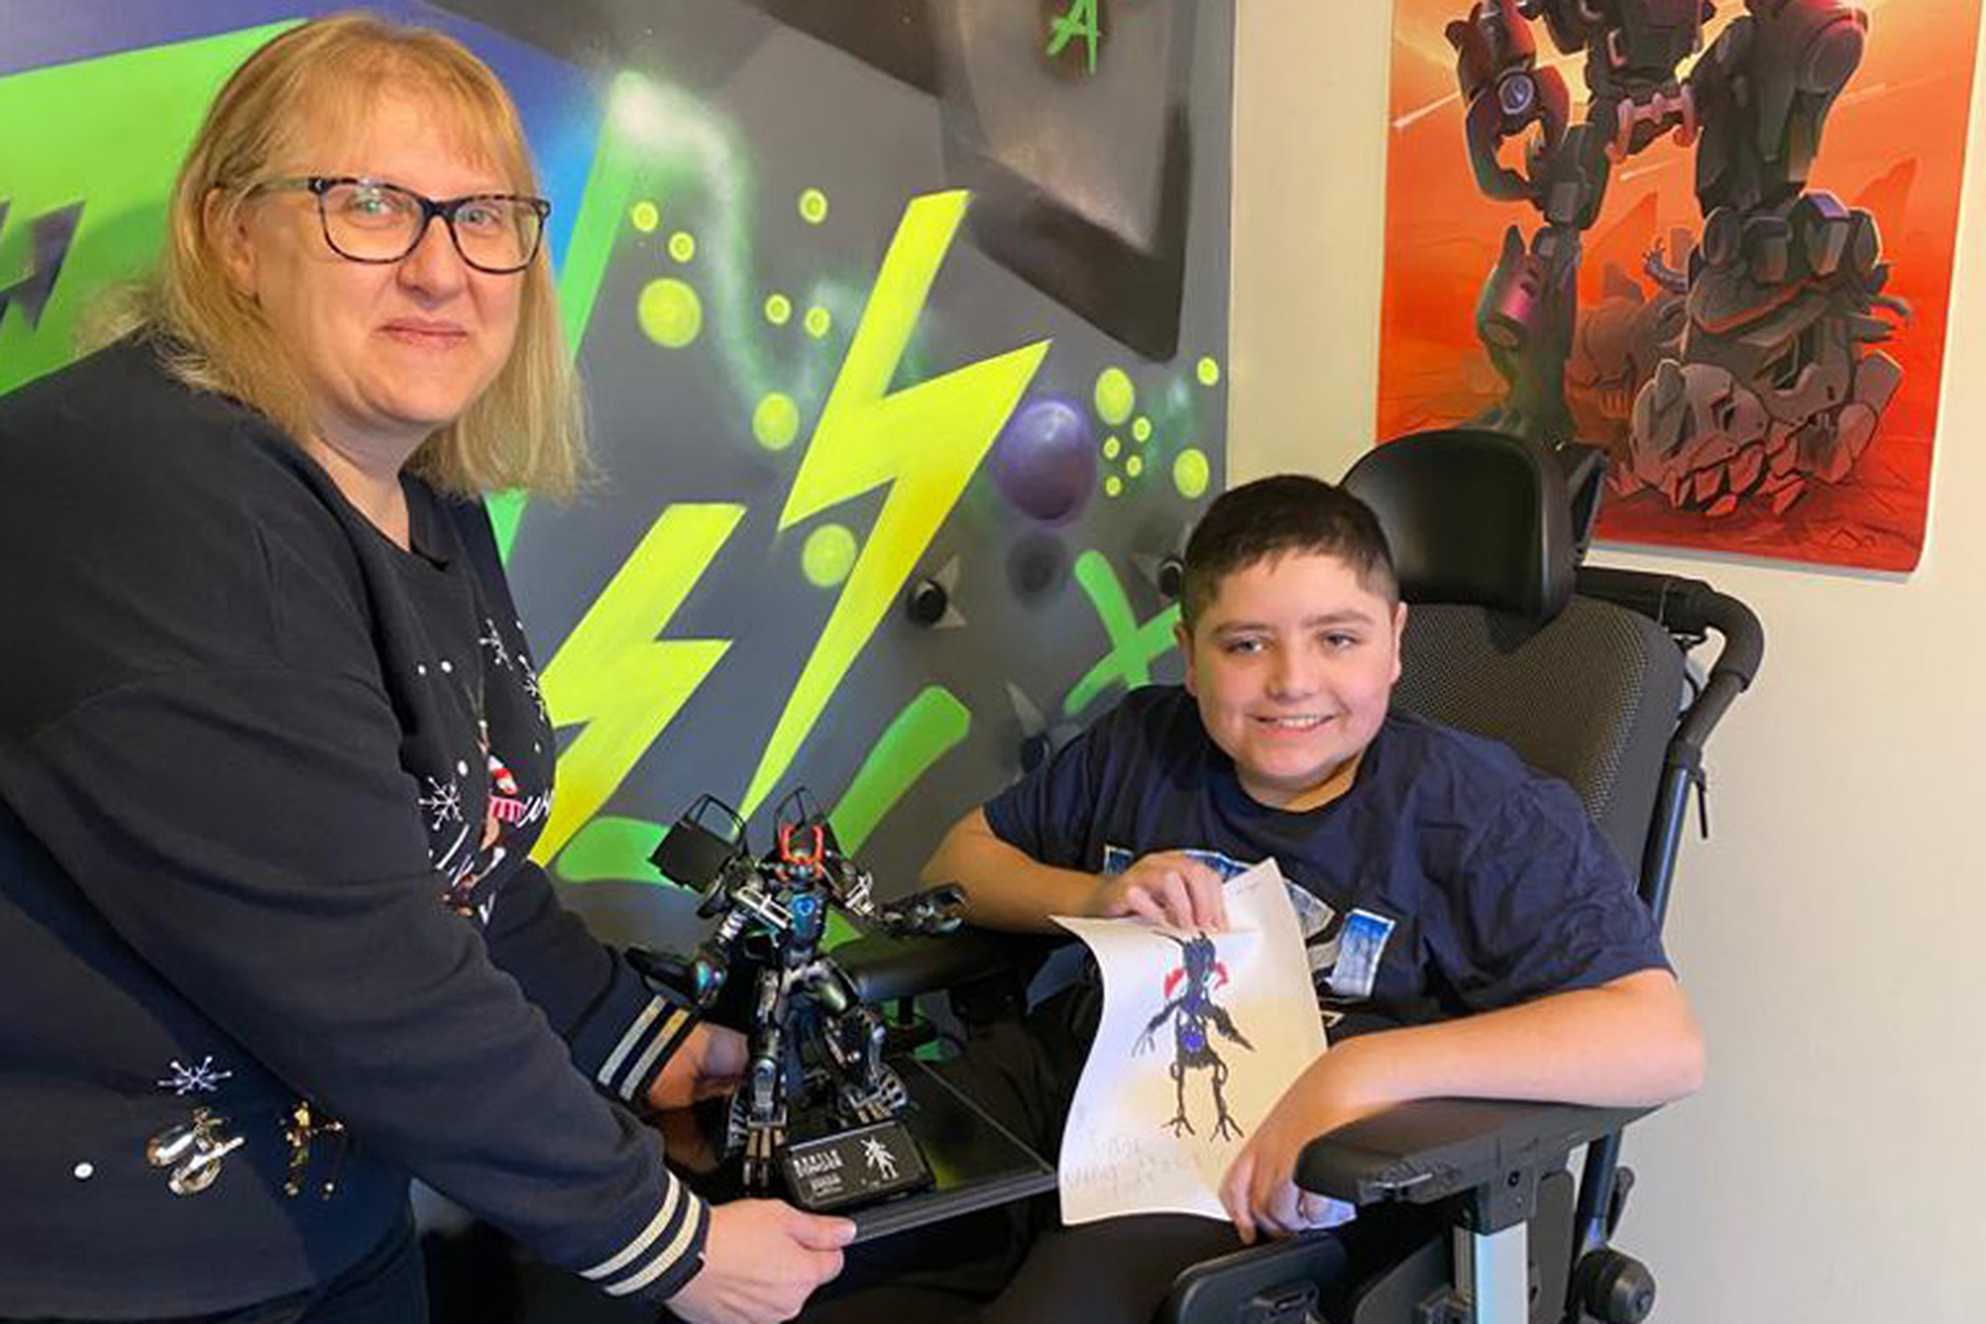 Kieran and his mum with his one-of-a-kind Beetle Stinger Transformer model.